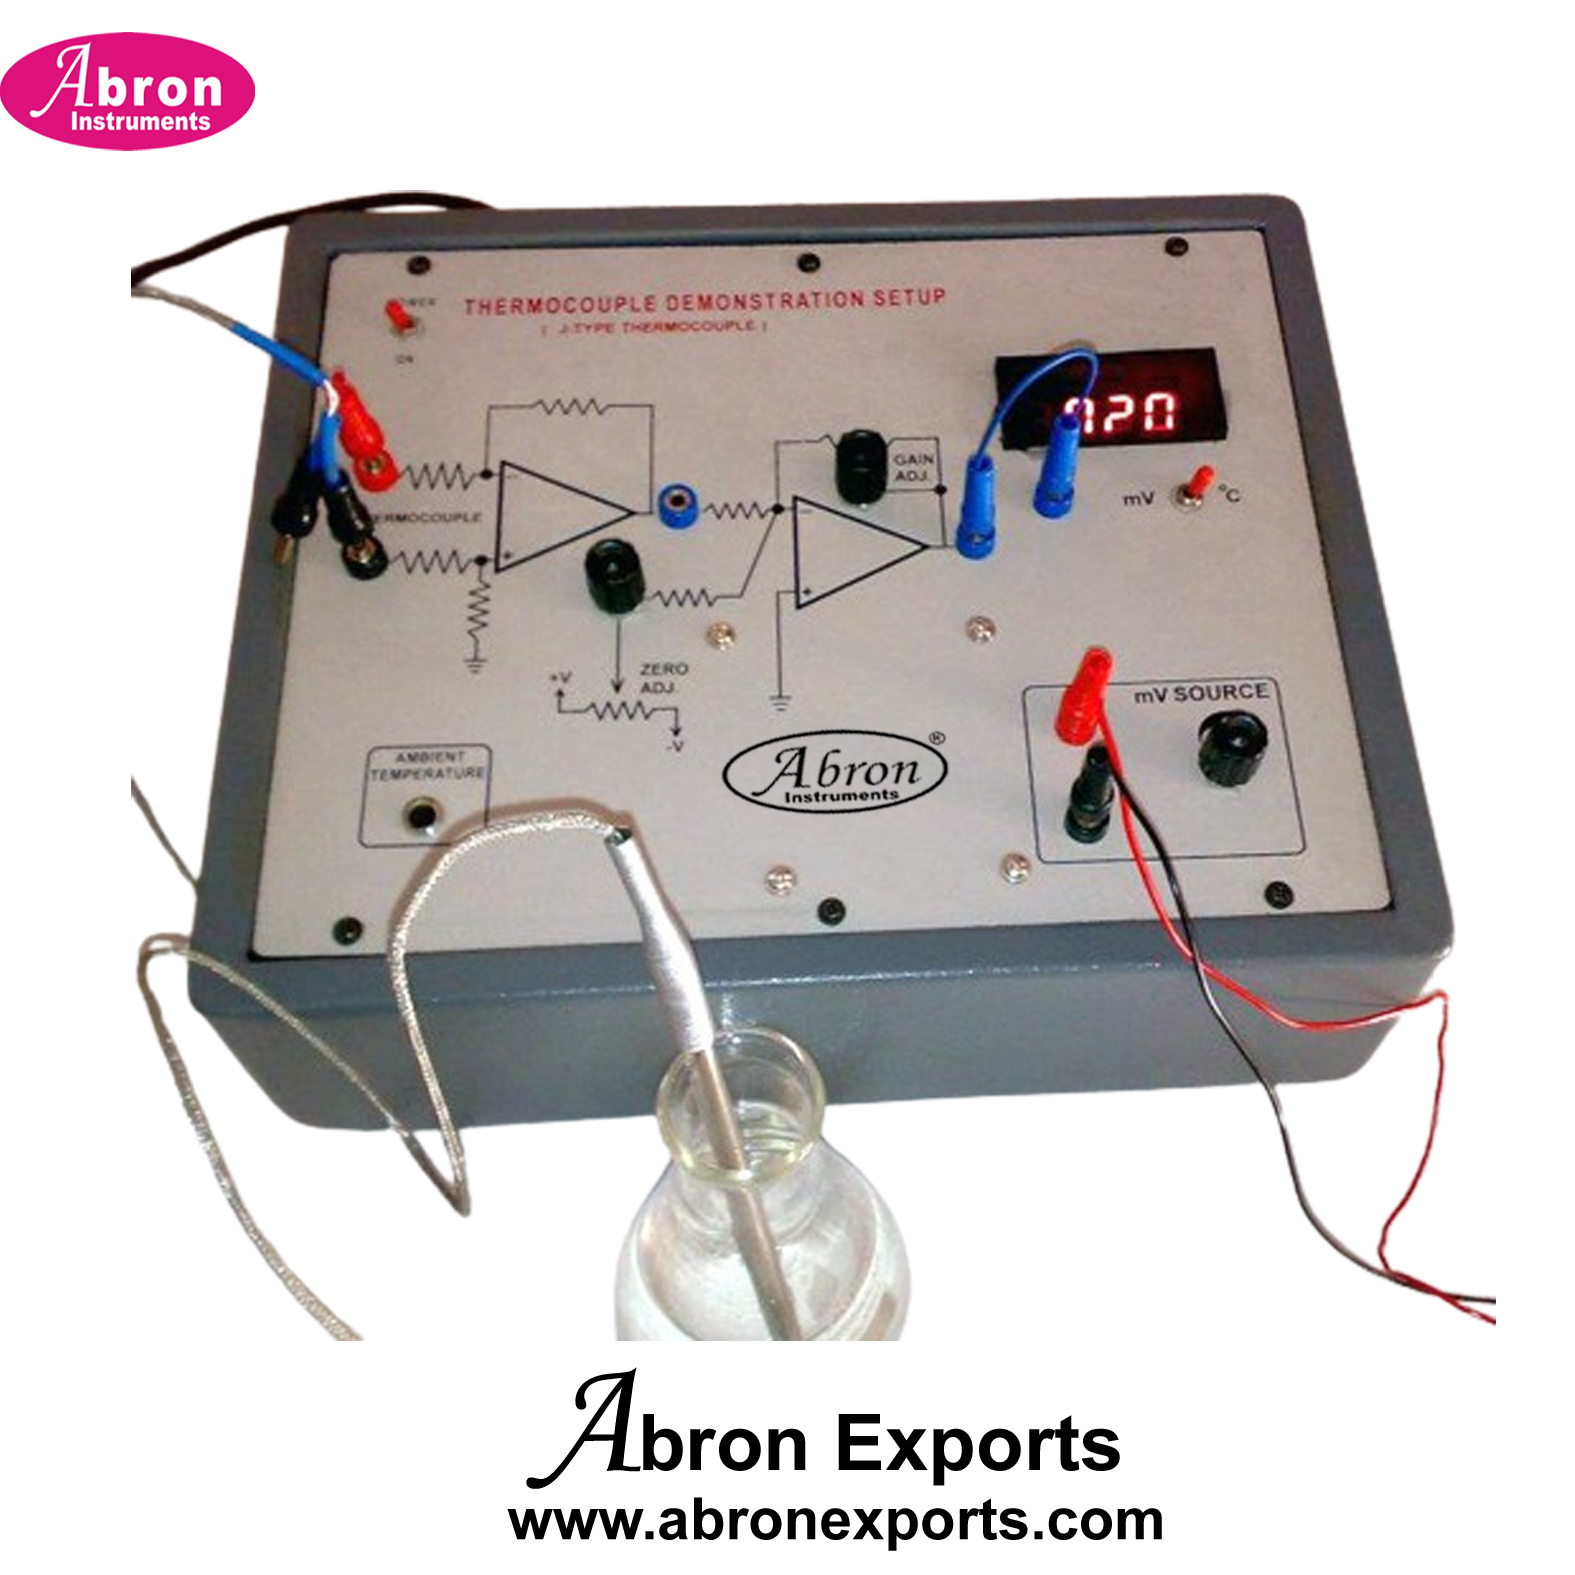 Thermocouple Setup Thermo EMF With Digital Meter Power Supply Trainer Kit Abron AE-1260D 